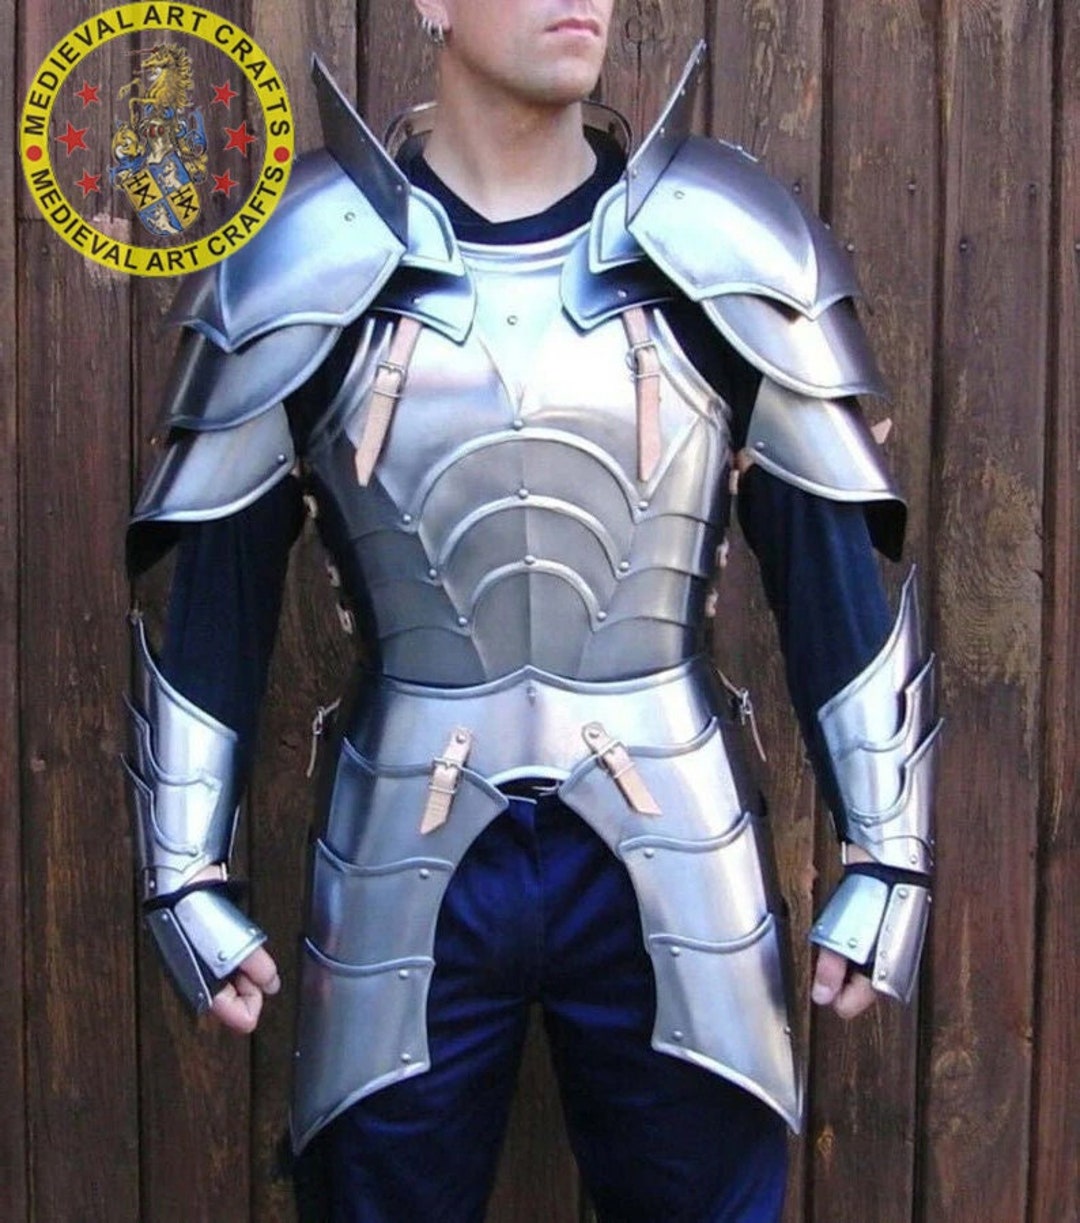 Knight Brave Female Armor, Gorget Pouldron Armor, Cosplay Armor, Sca Armor,  Larp Armor, Gift for Women -  Canada